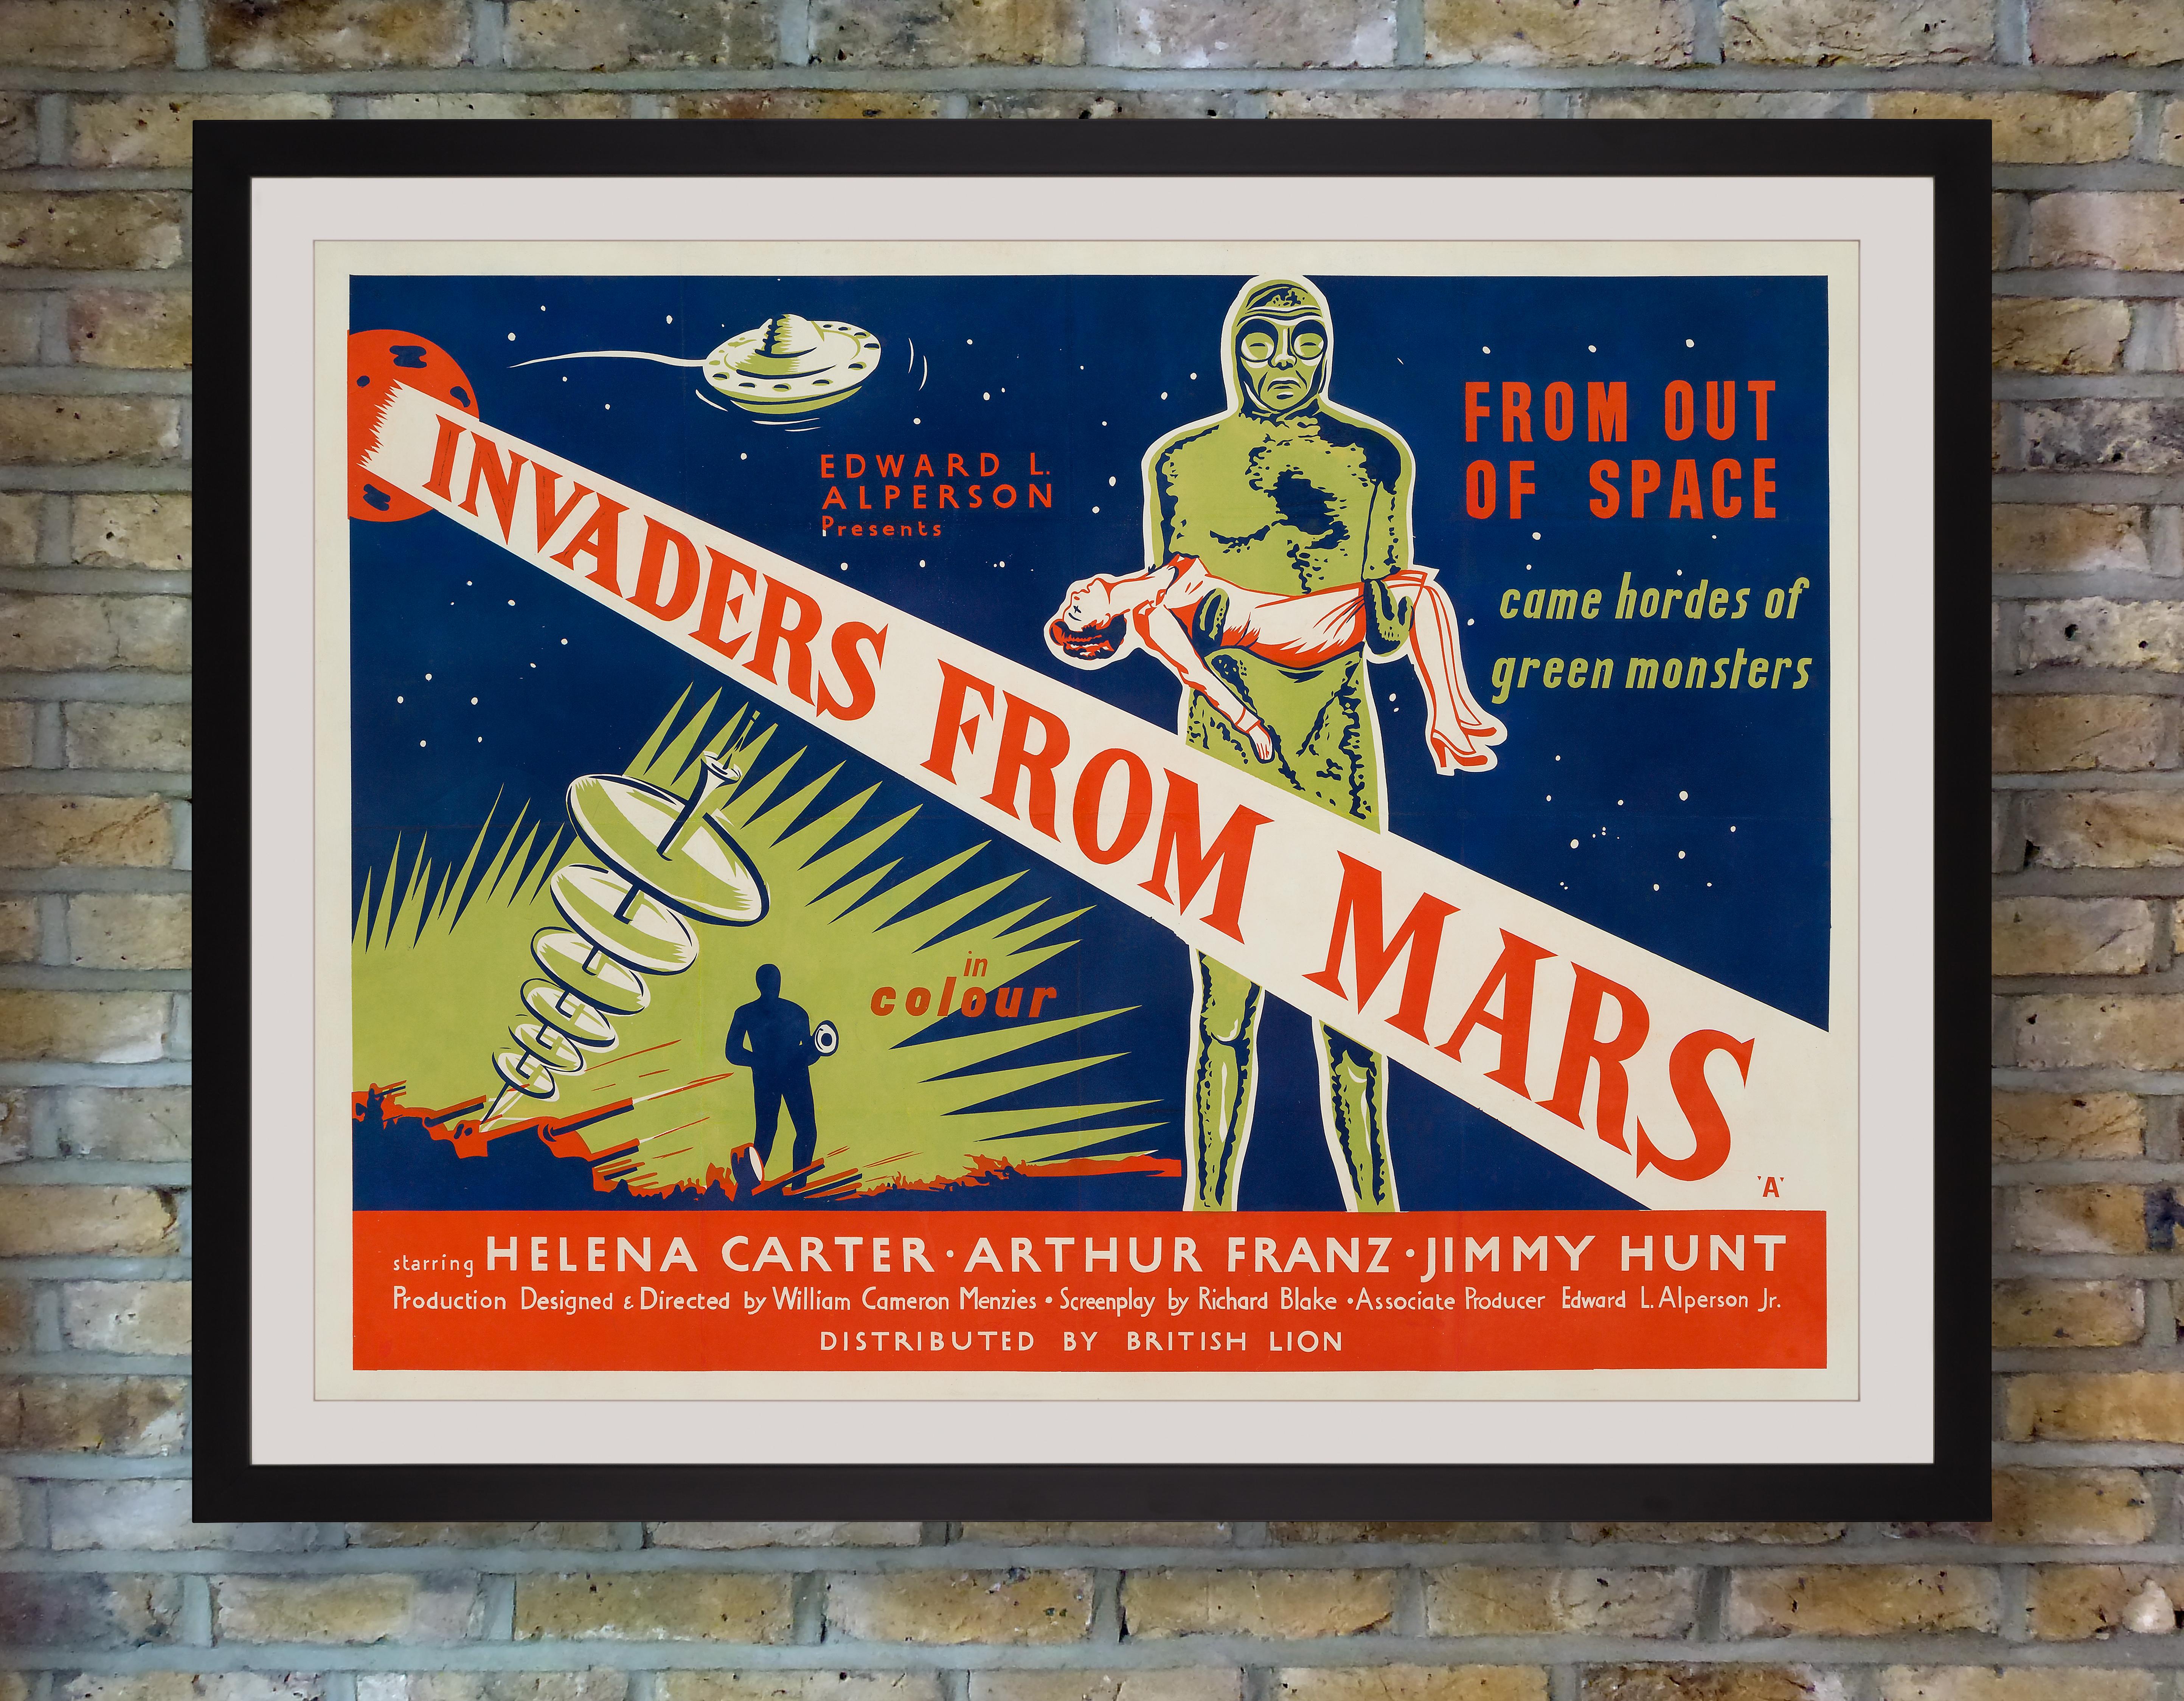 An exceedingly rare British quad for the first UK release of classic fifties sci-fi 